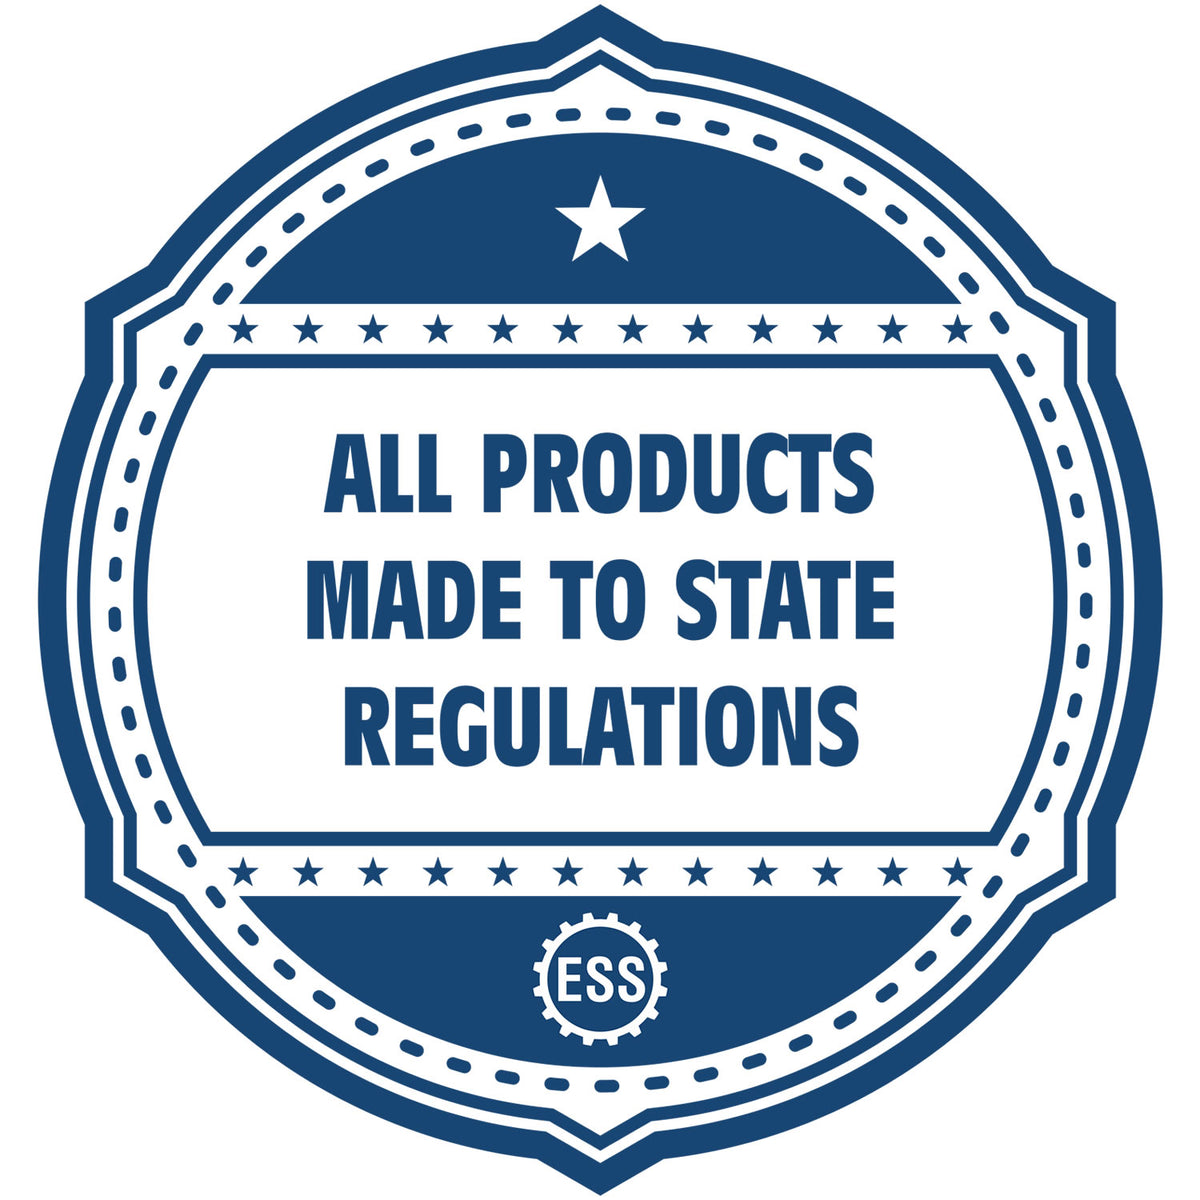 A blue icon or badge for the Hybrid Missouri Geologist Seal showing that this product is made in compliance with state regulations.